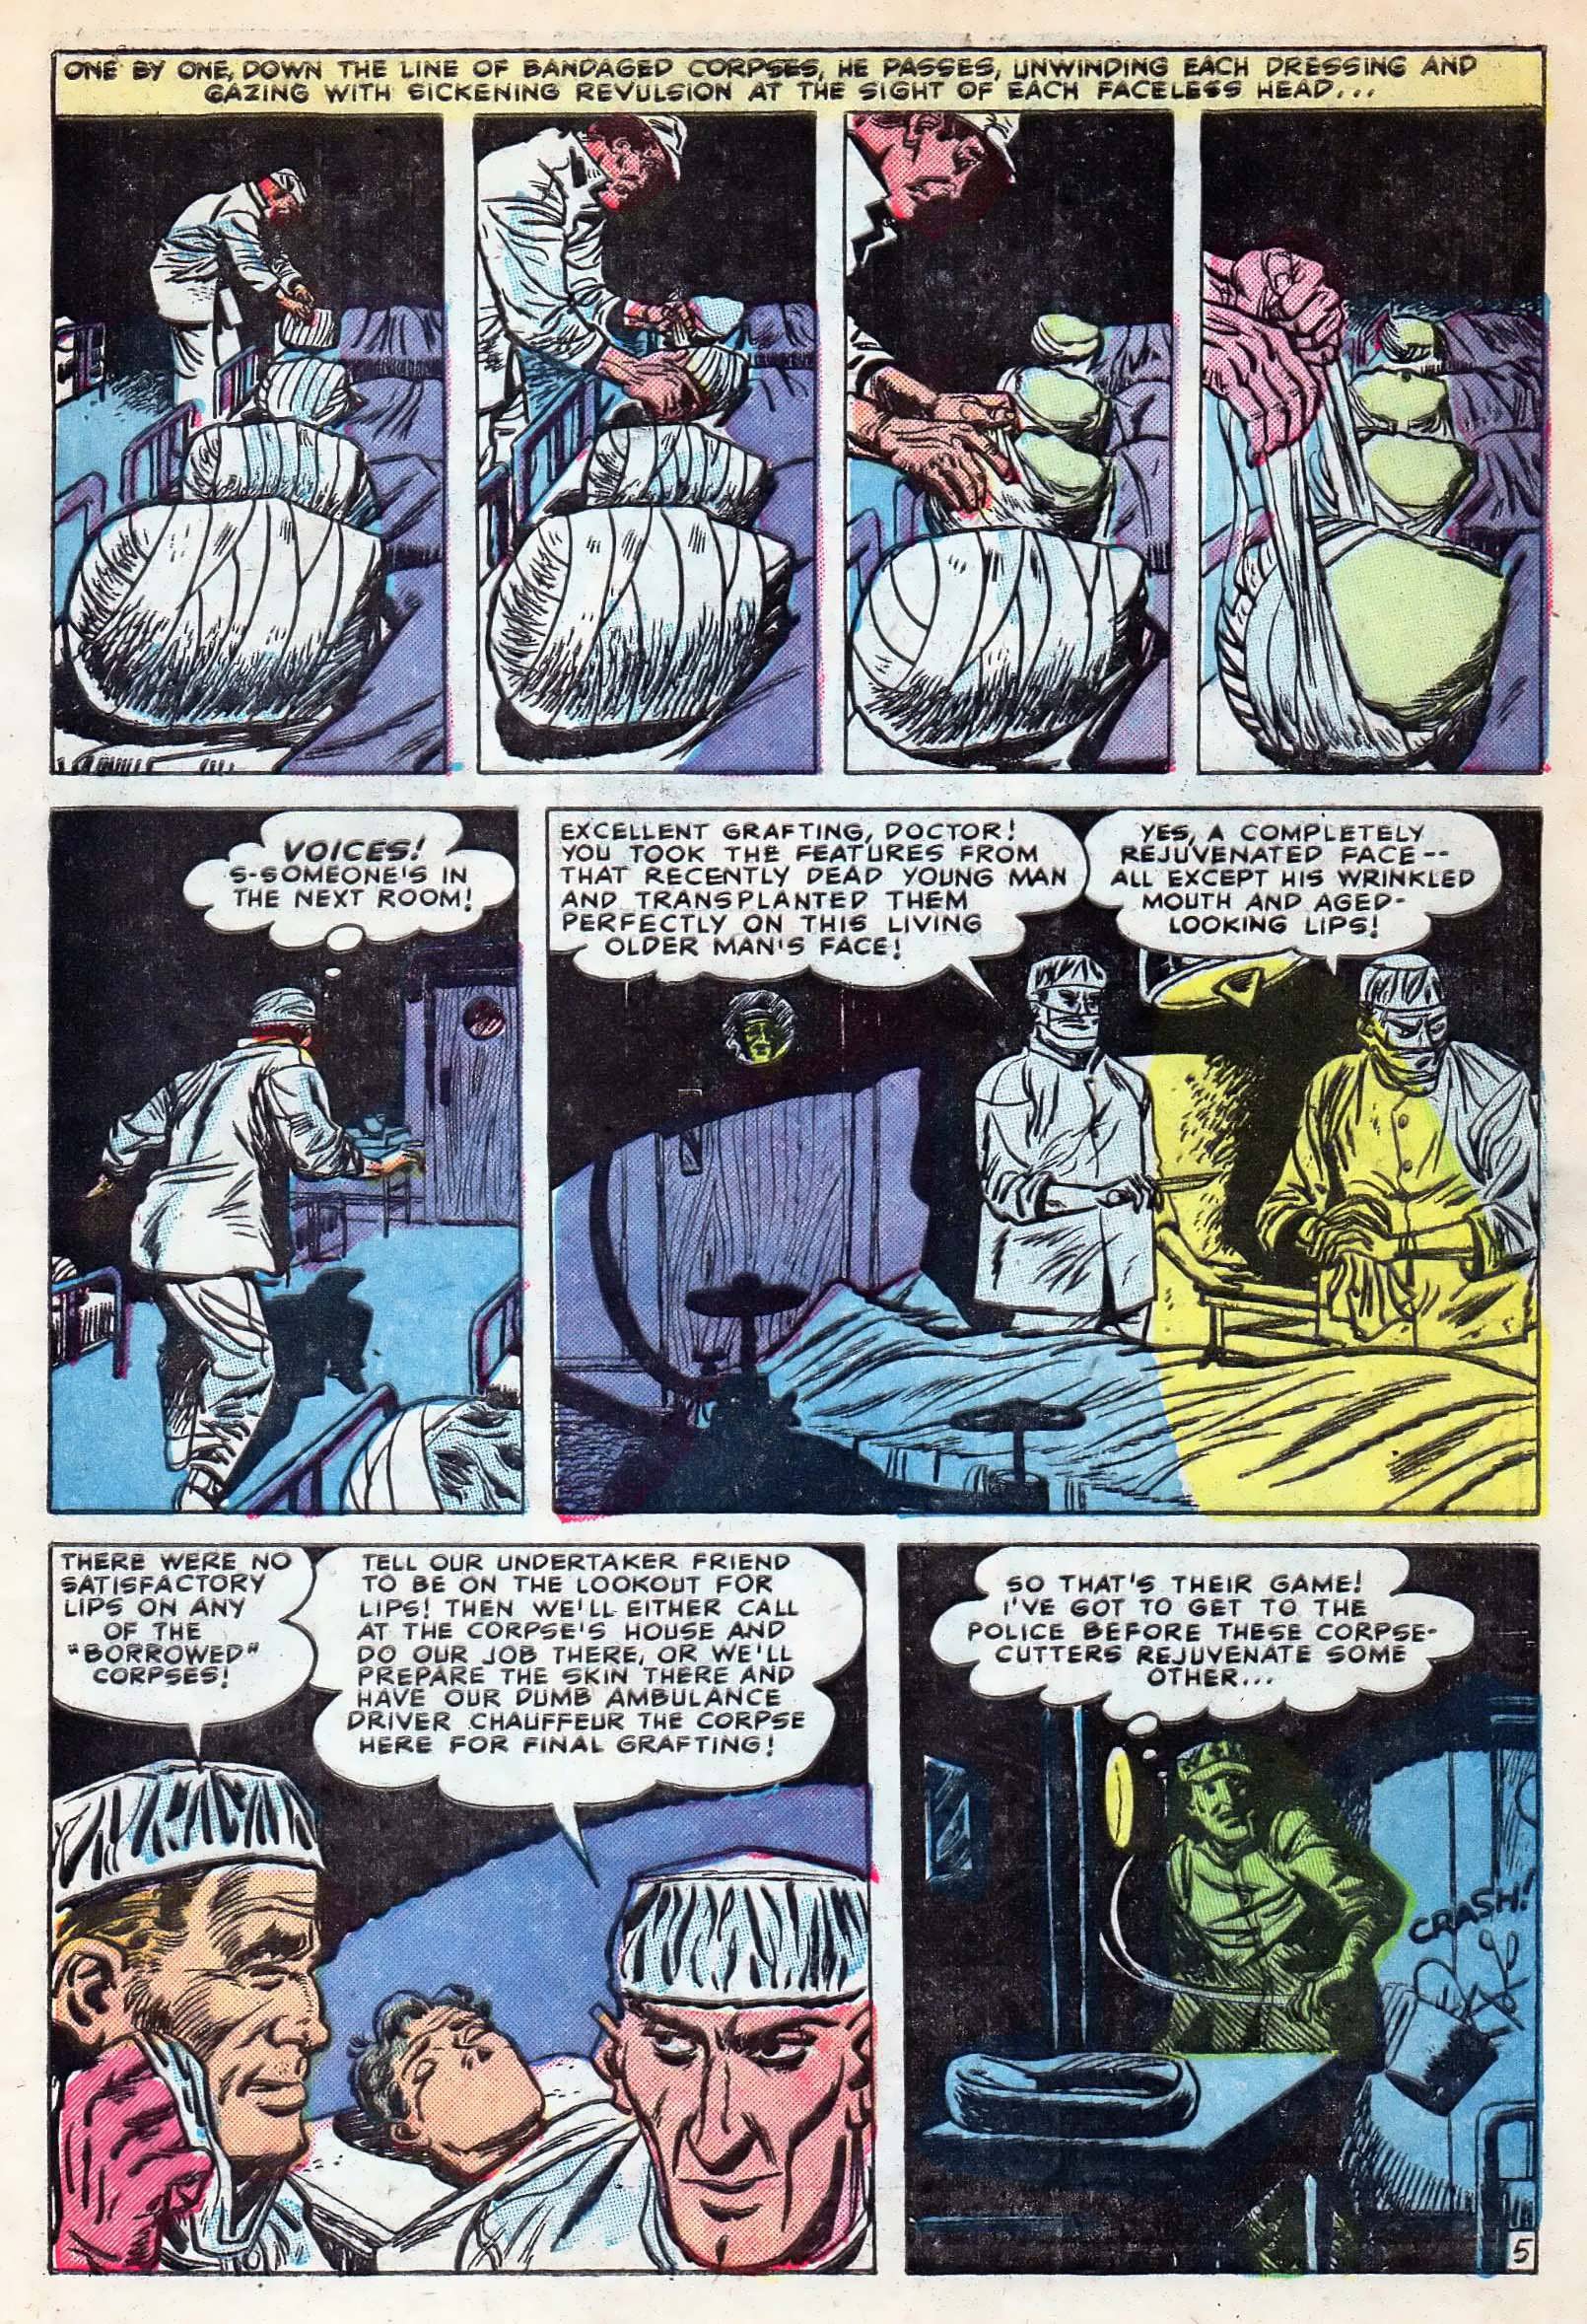 Marvel Tales (1949) 115 Page 6